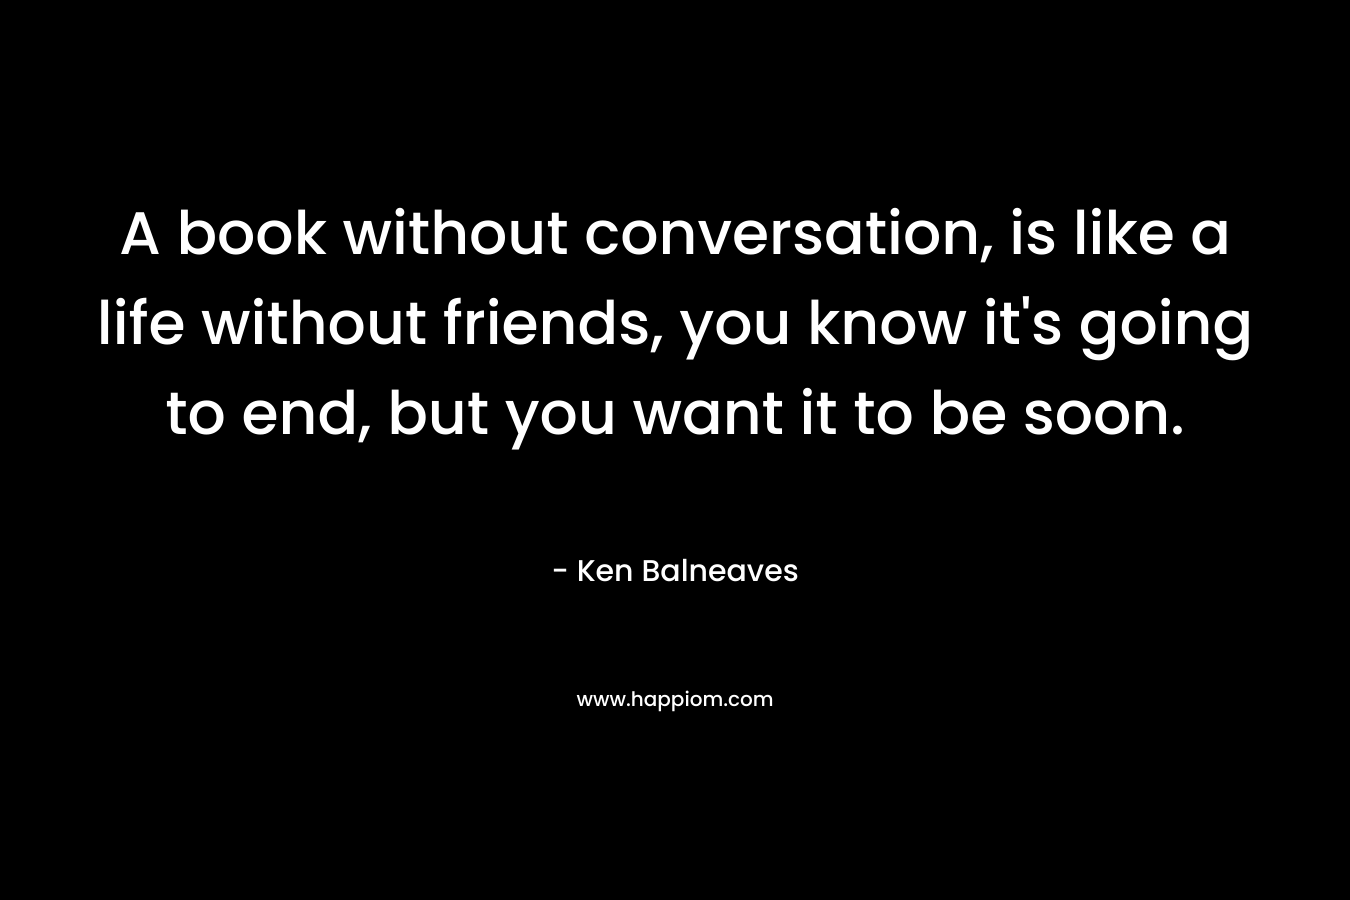 A book without conversation, is like a life without friends, you know it’s going to end, but you want it to be soon. – Ken Balneaves